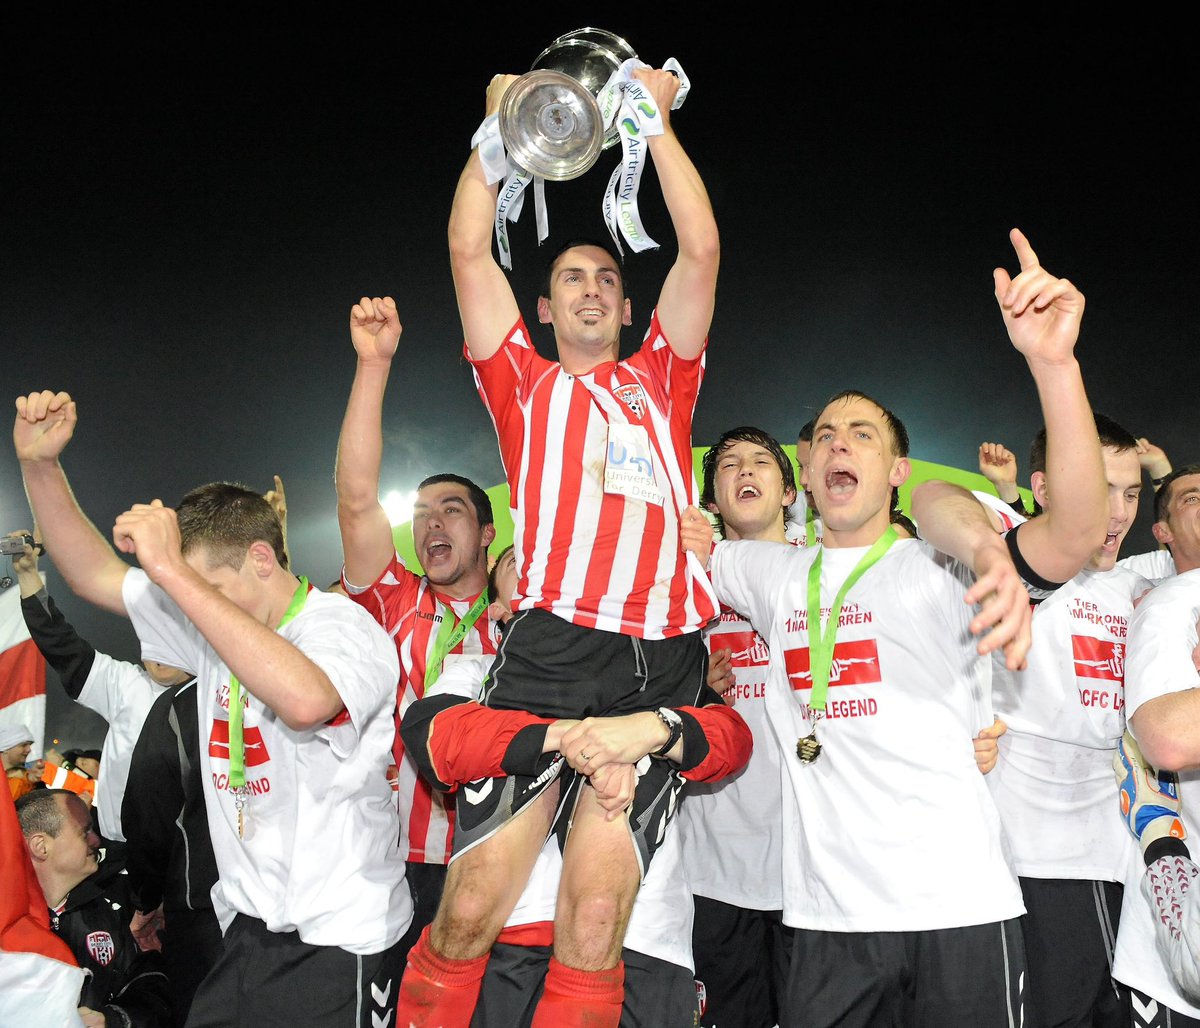 Remembering the great Mark Farren today on the eight anniversary of his passing. @derrycityfc and LOI legend ❤️